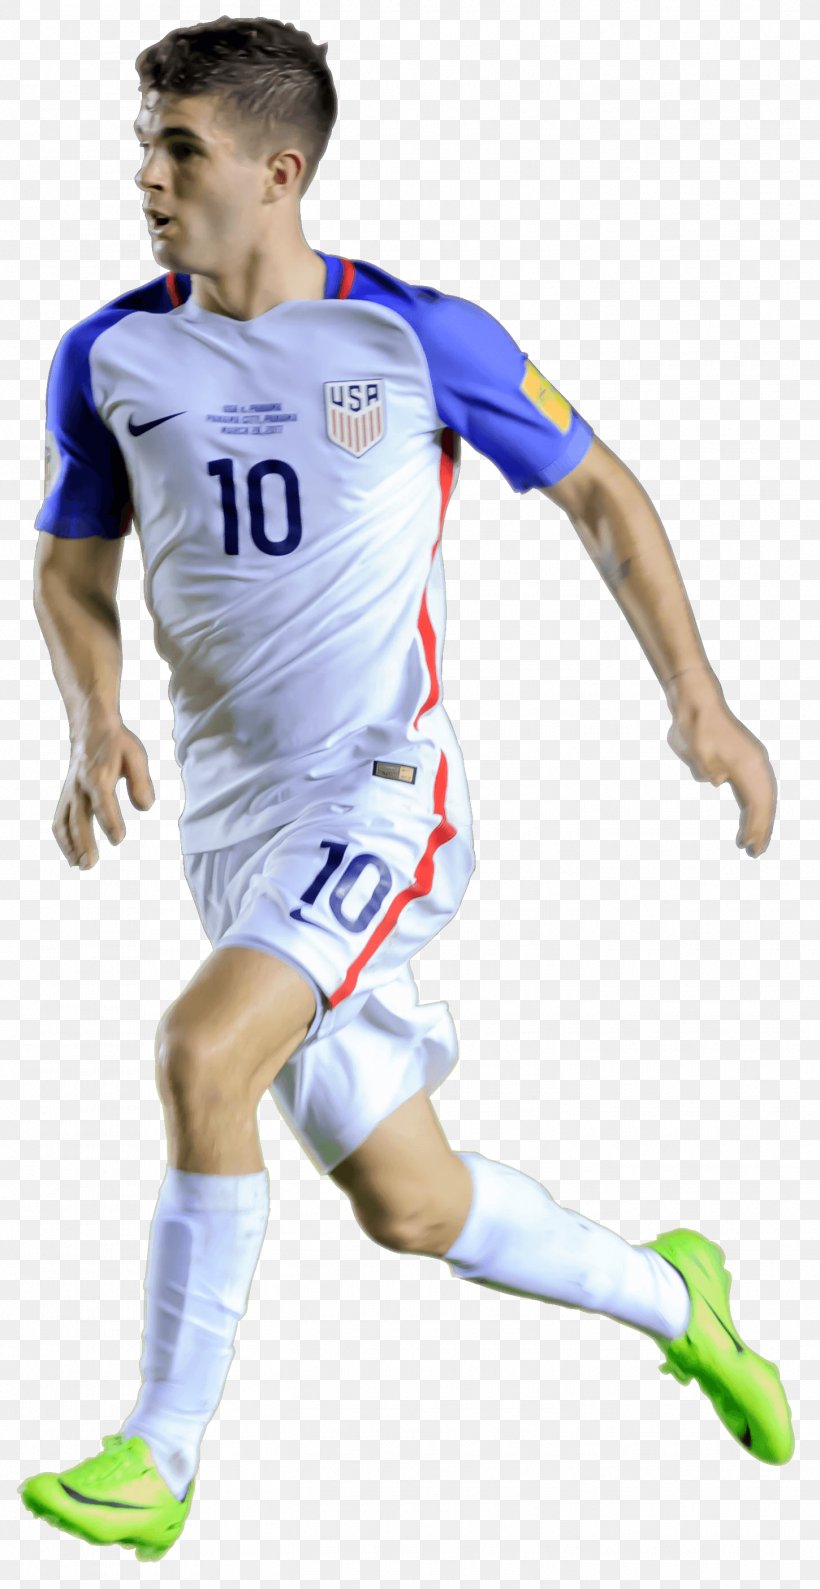 Christian Pulisic National Soccer Hall Of Fame United States Men's National Soccer Team Football Player, PNG, 1450x2811px, Christian Pulisic, Ball, Football, Football Player, Forward Download Free